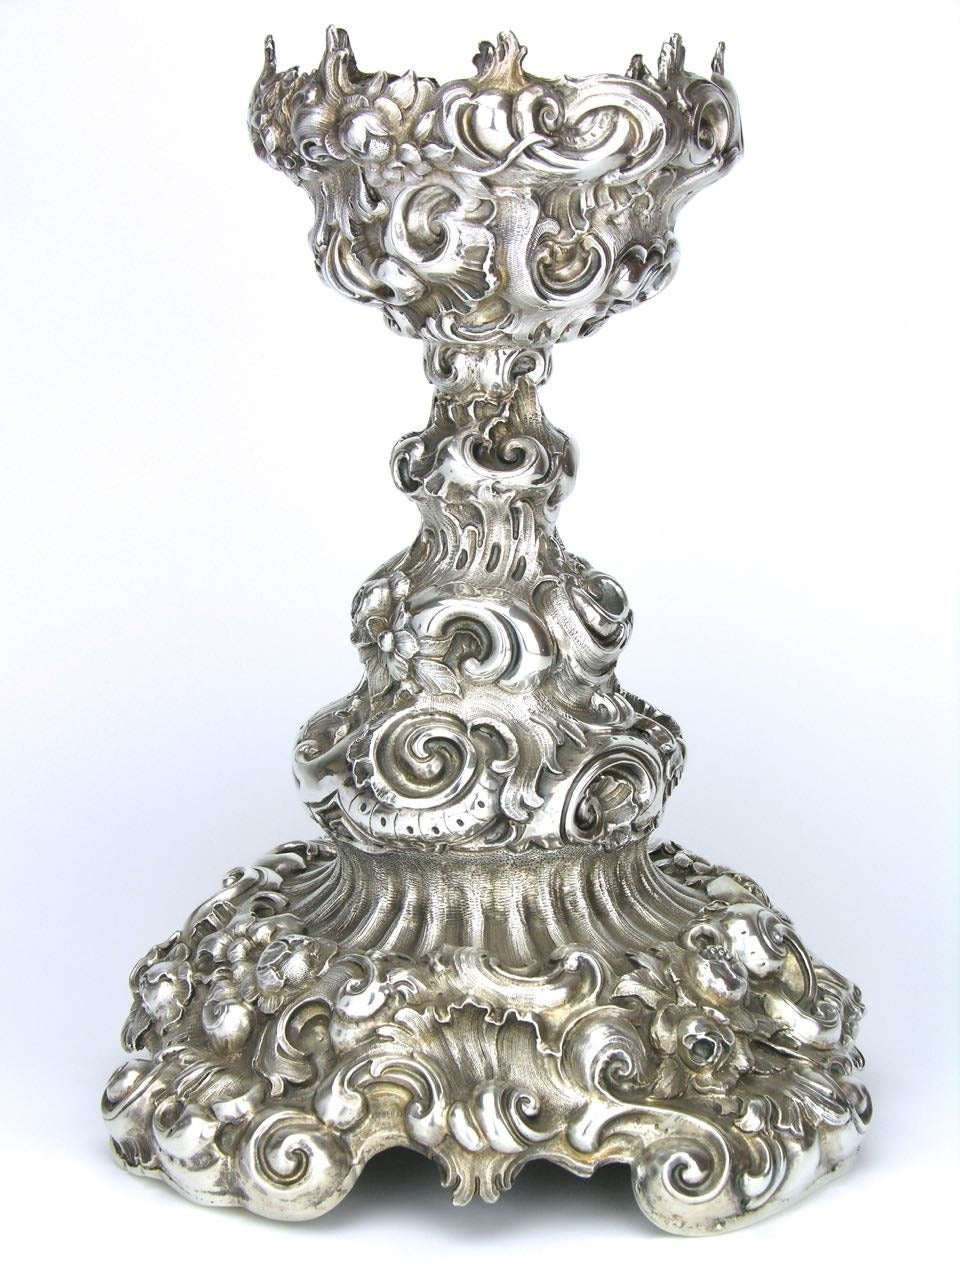 Repoussé 19th Century Austrian Continental Silver and Crystal Centerpiece For Sale